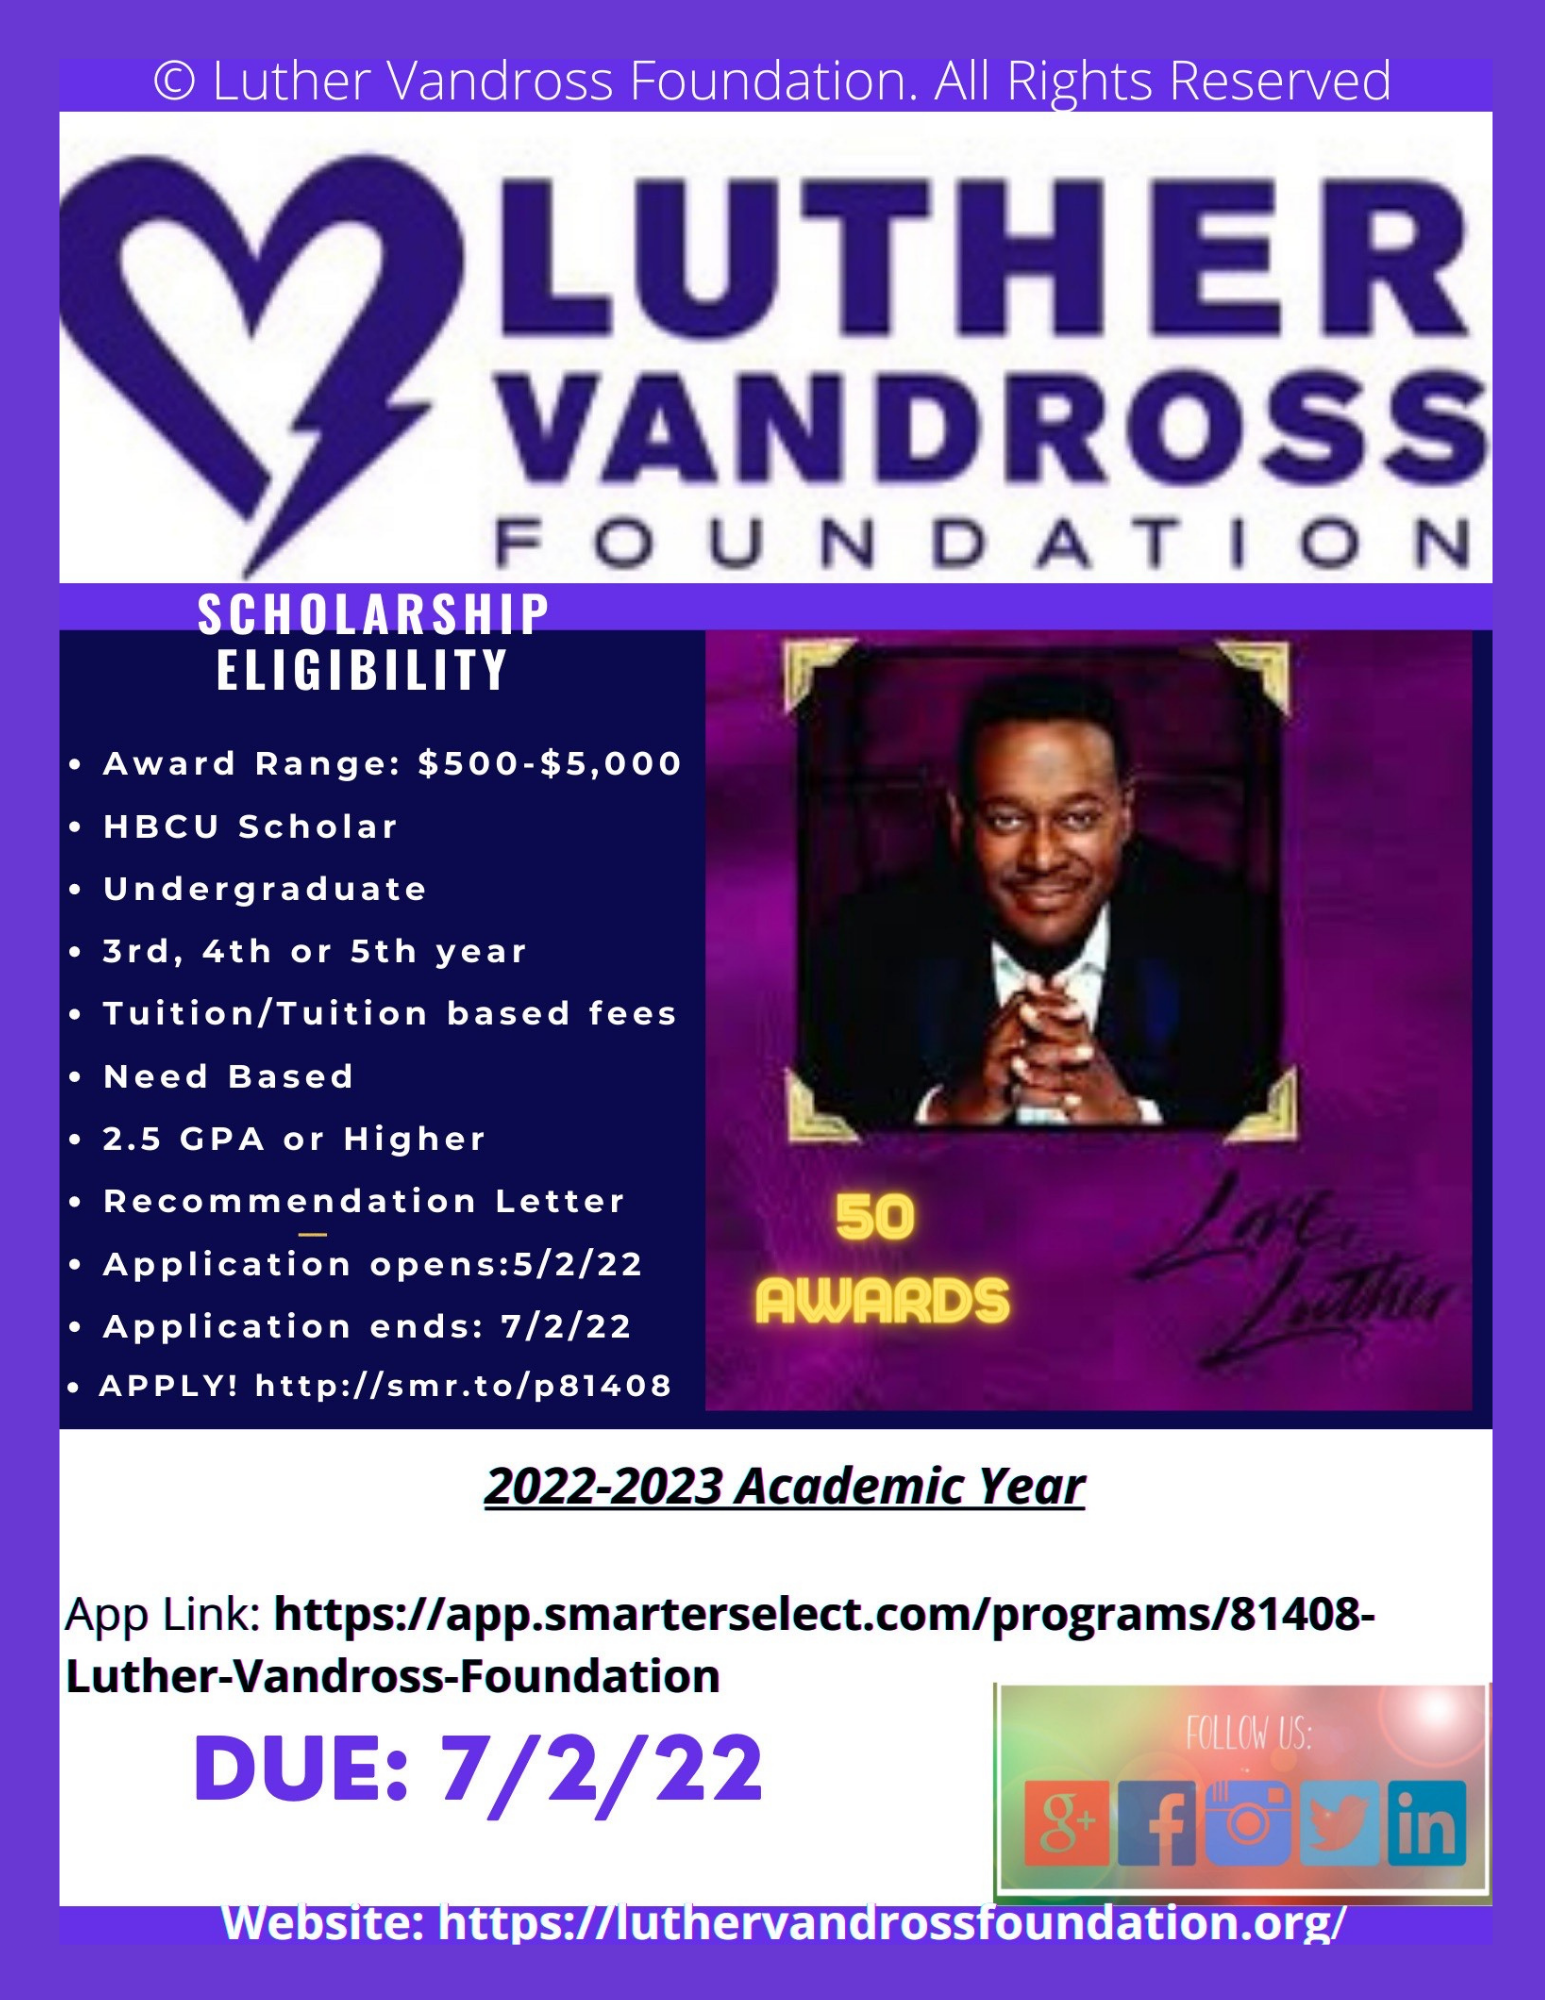 https://fandross.com/wp-content/uploads/2022/05/Scholarship-with-border-rev.png